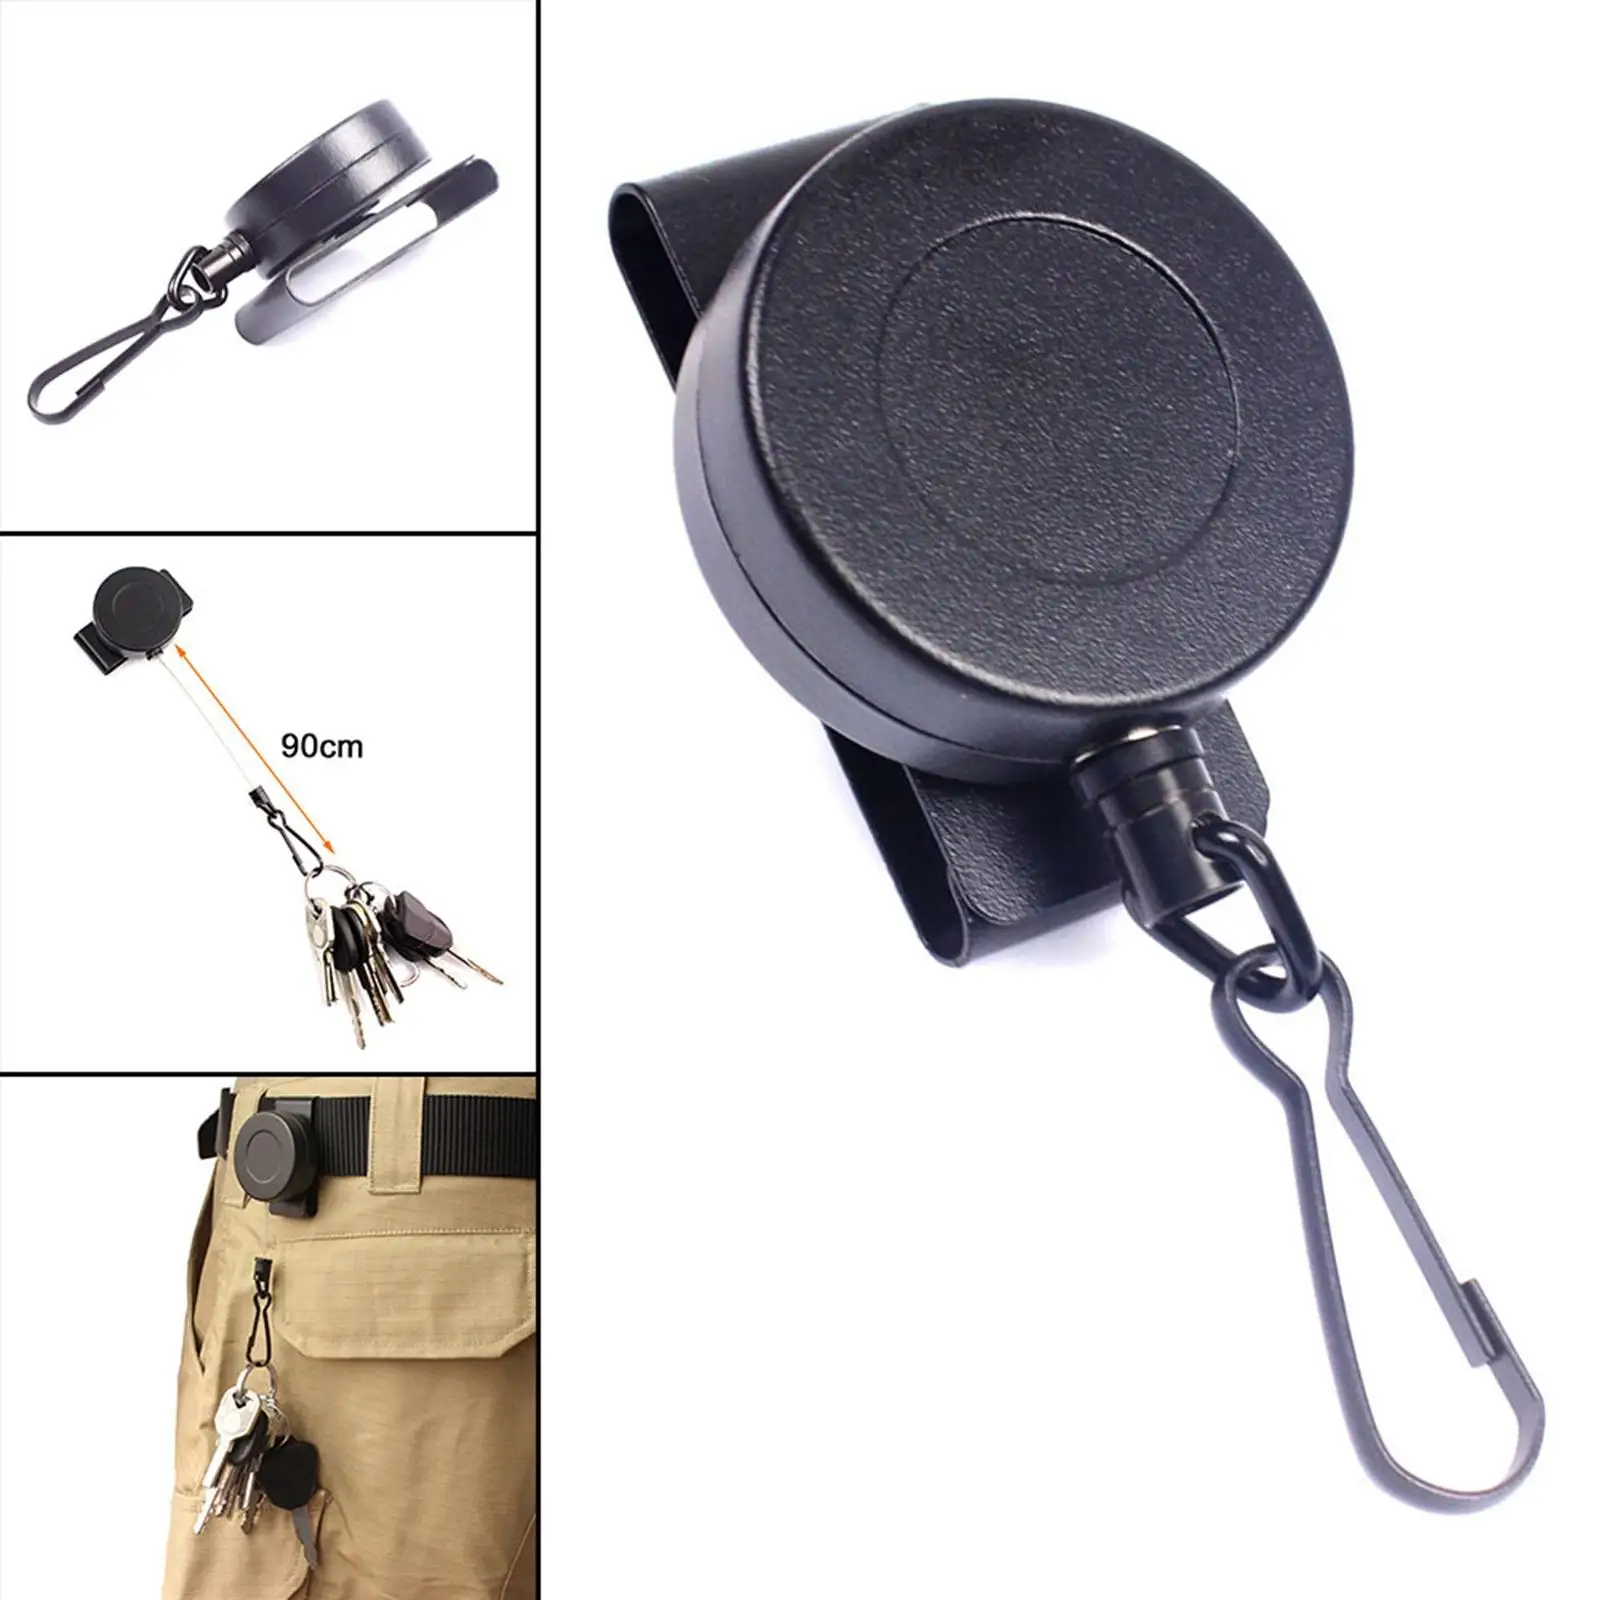 Retractable Keychain Metal Steel Wire Cord Key Holder with Belt Clip Name Card Keychain Badge Holder Reel